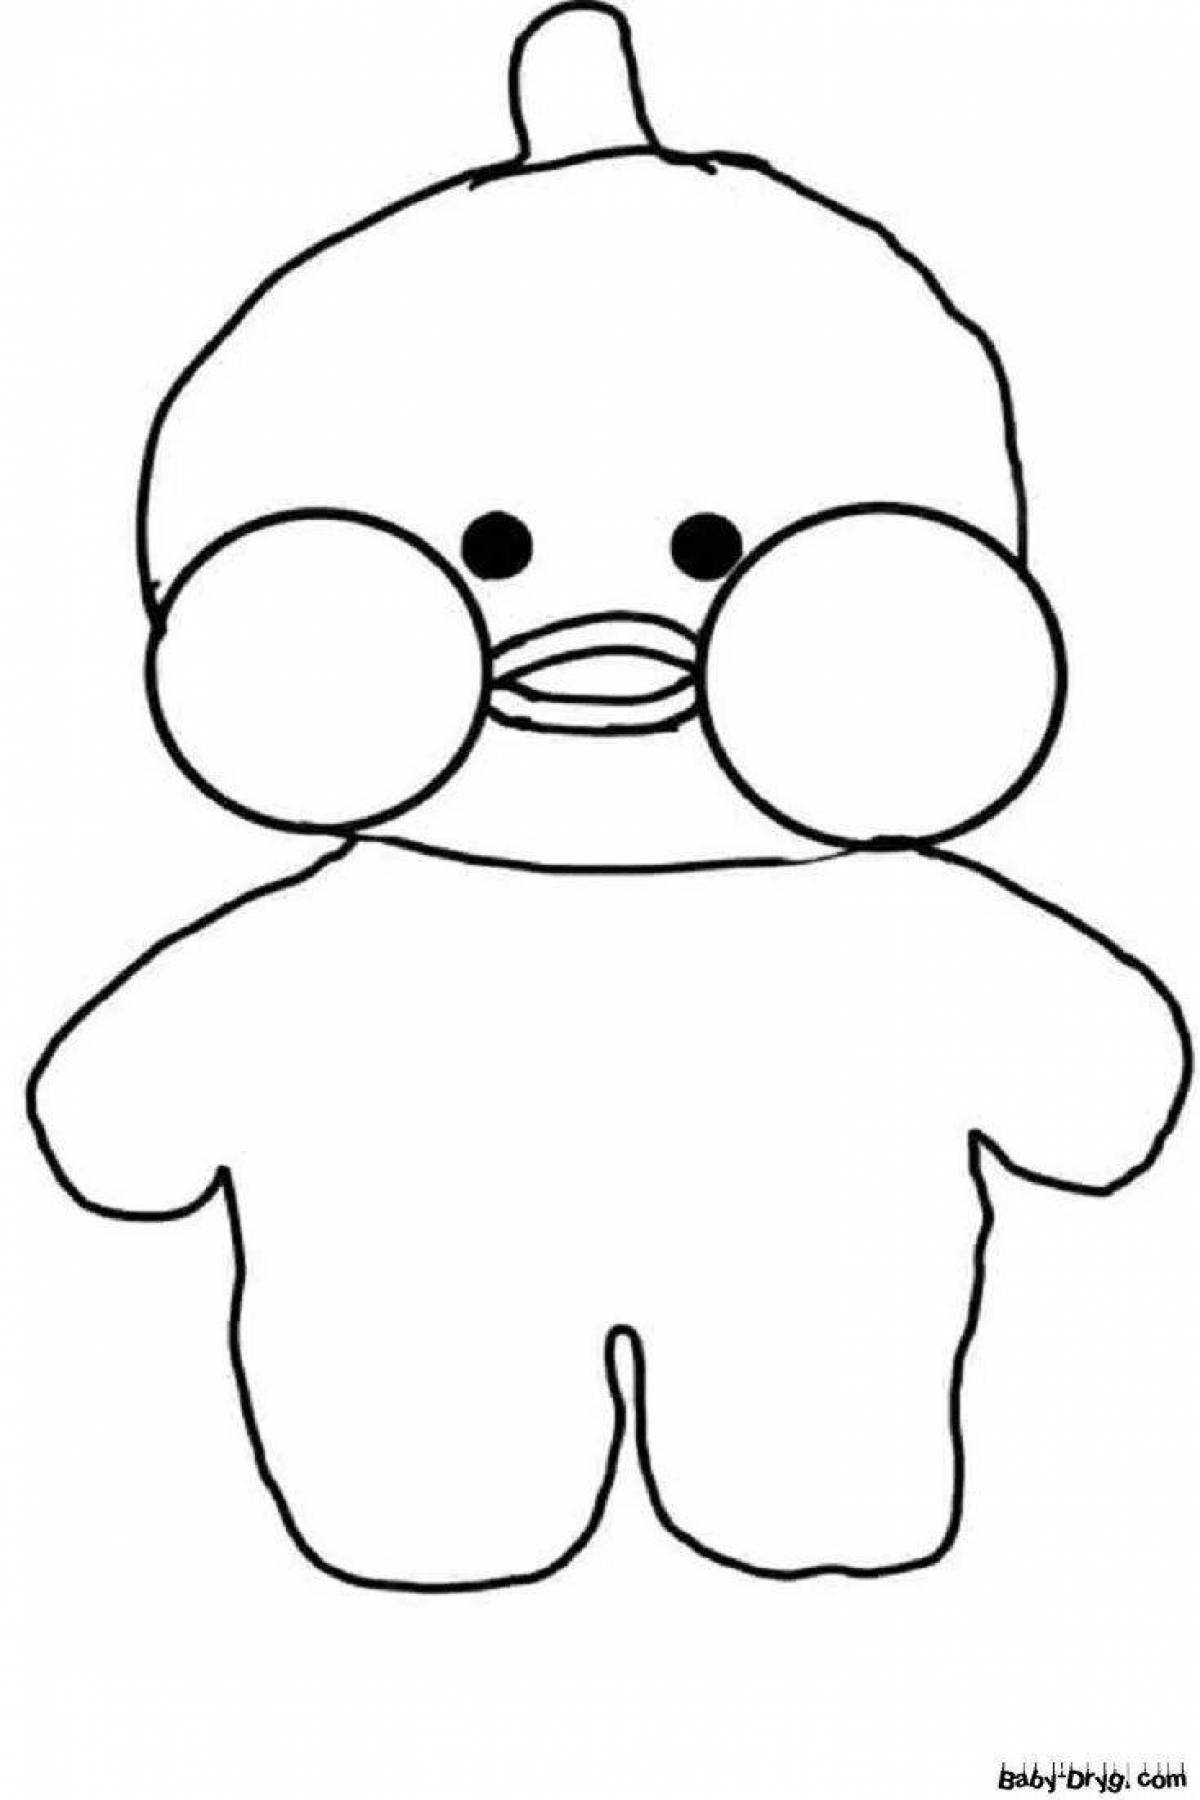 Lalafanfan big duck coloring pages for kids